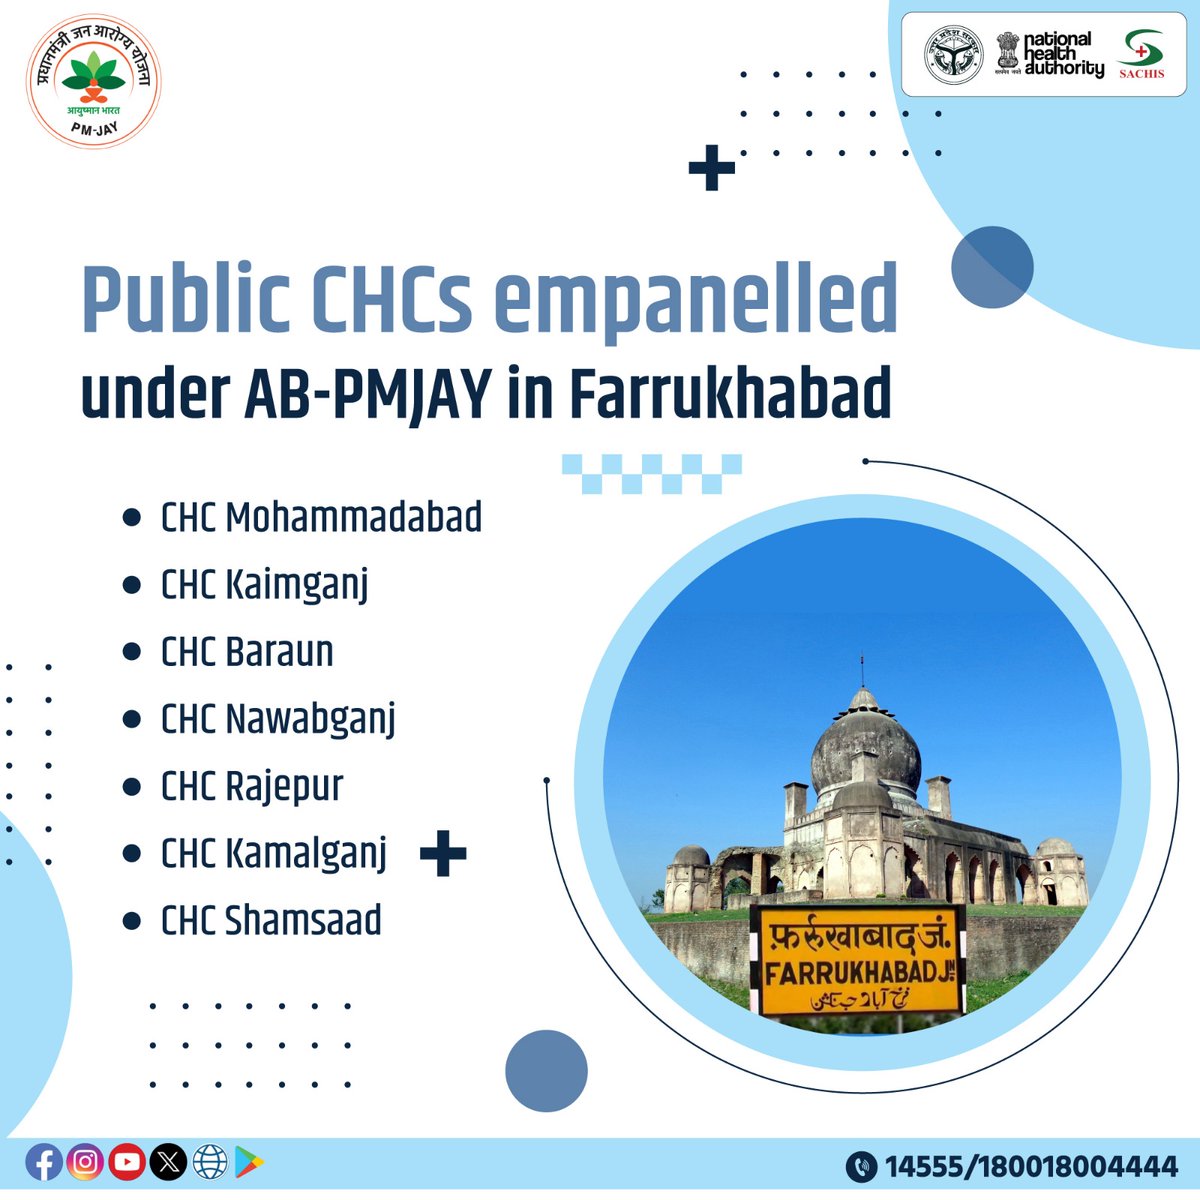 Obtain your #AyushmanCard from the nearest Community Health Centre (CHC) if you require treatment under #PMJAY while in #Farrukhabad. Below is a list of CHCs available in Farrukhabad.

#HealthcareAccess #communityhealthcentre @AyushmanNHA @nhm_up @Sangeet82530151 @Sen2Partha